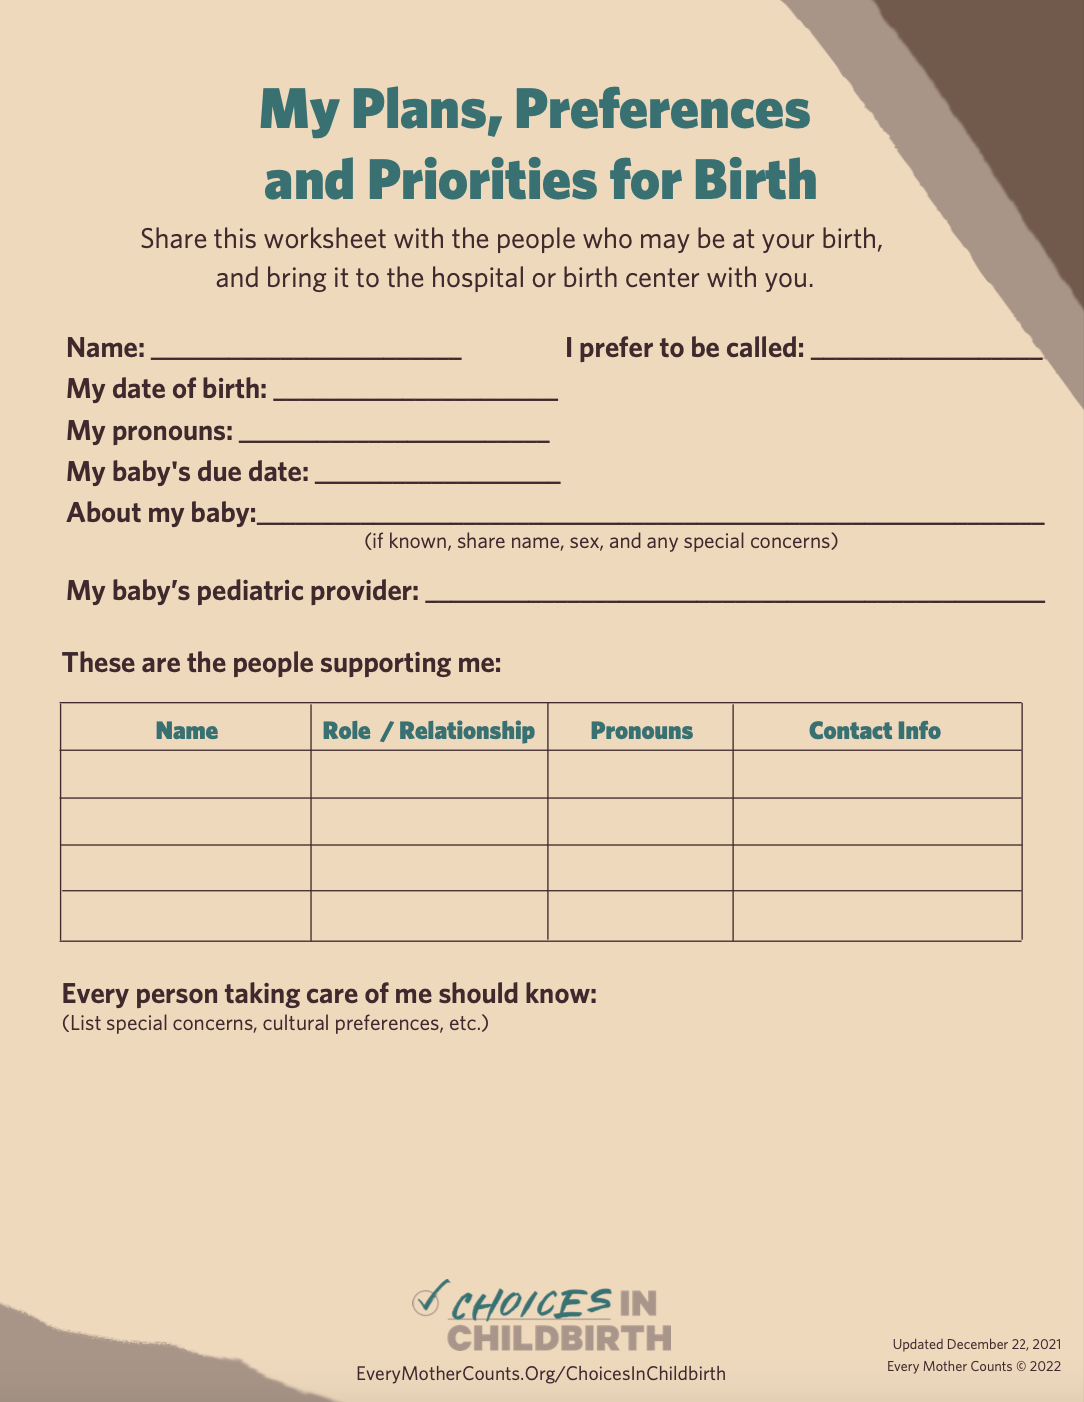 My Plans, Preferences, and Priorities for Birth